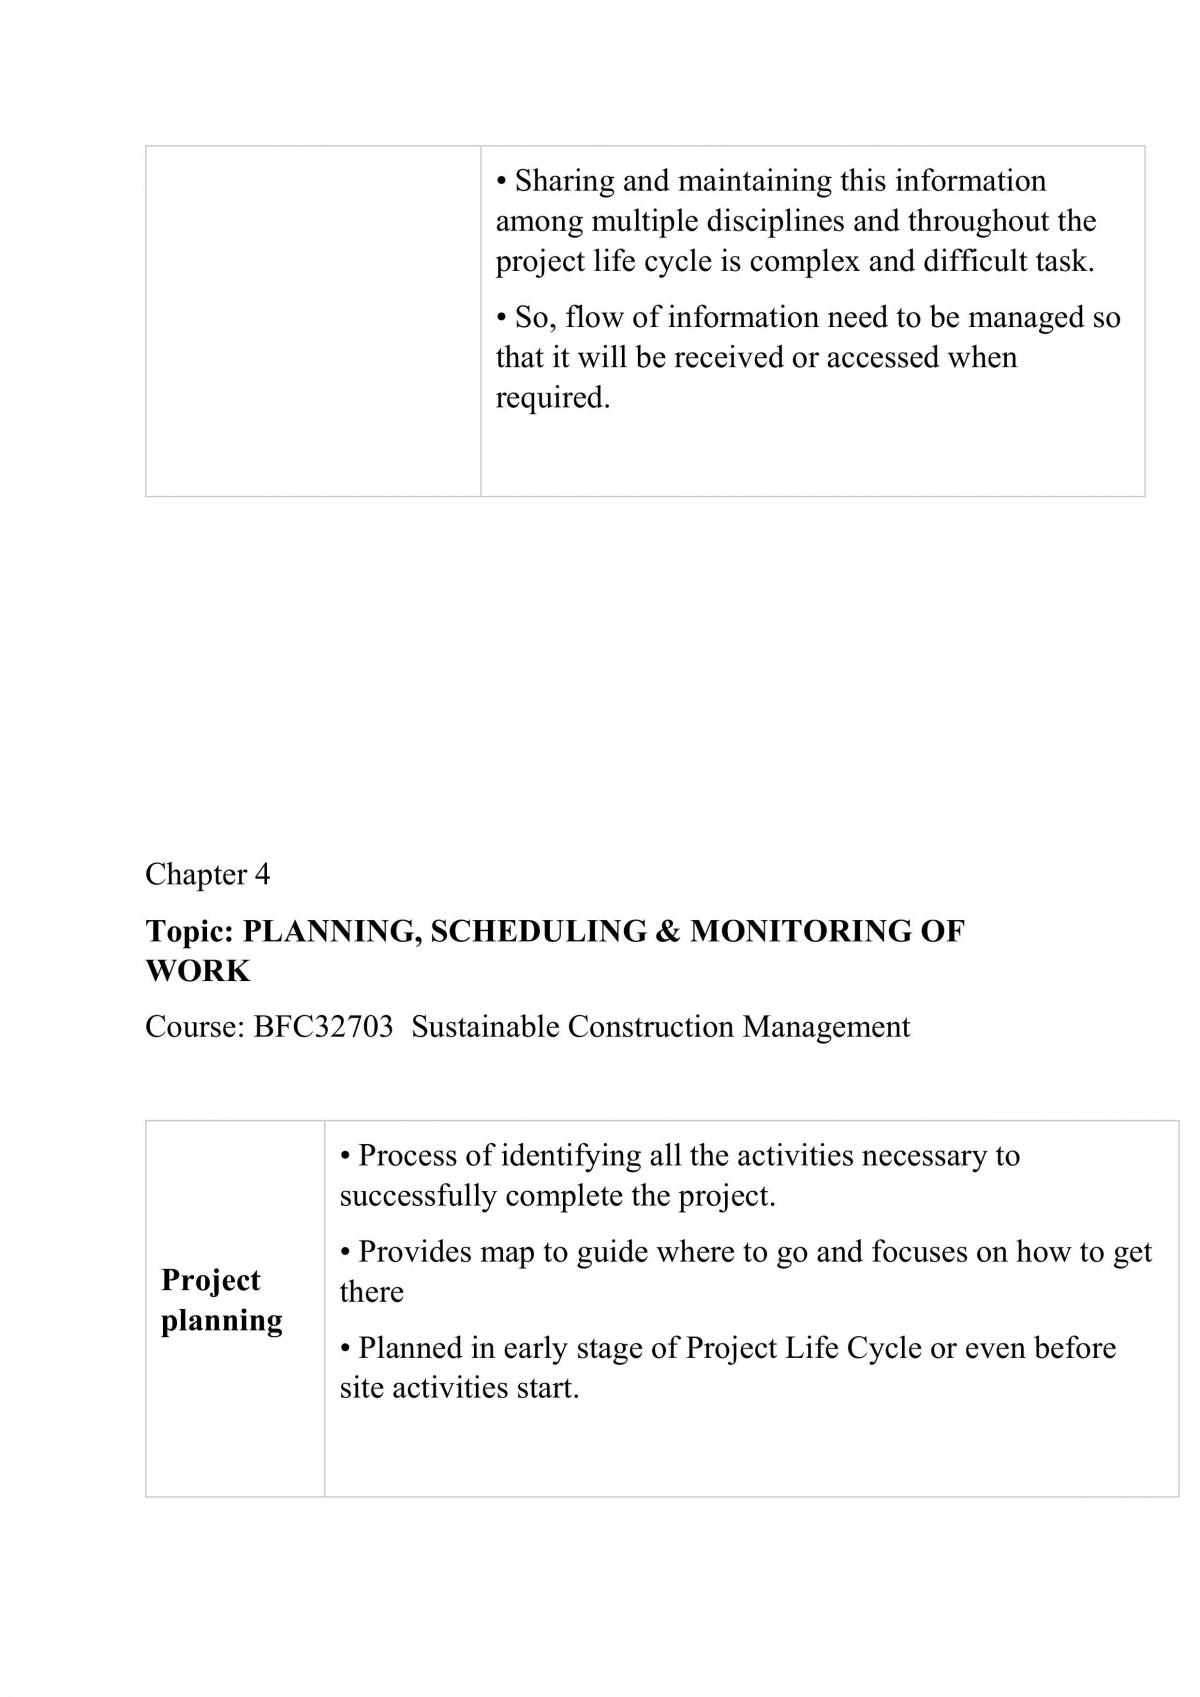 Sustainable Construction Management Study Notes - Page 12